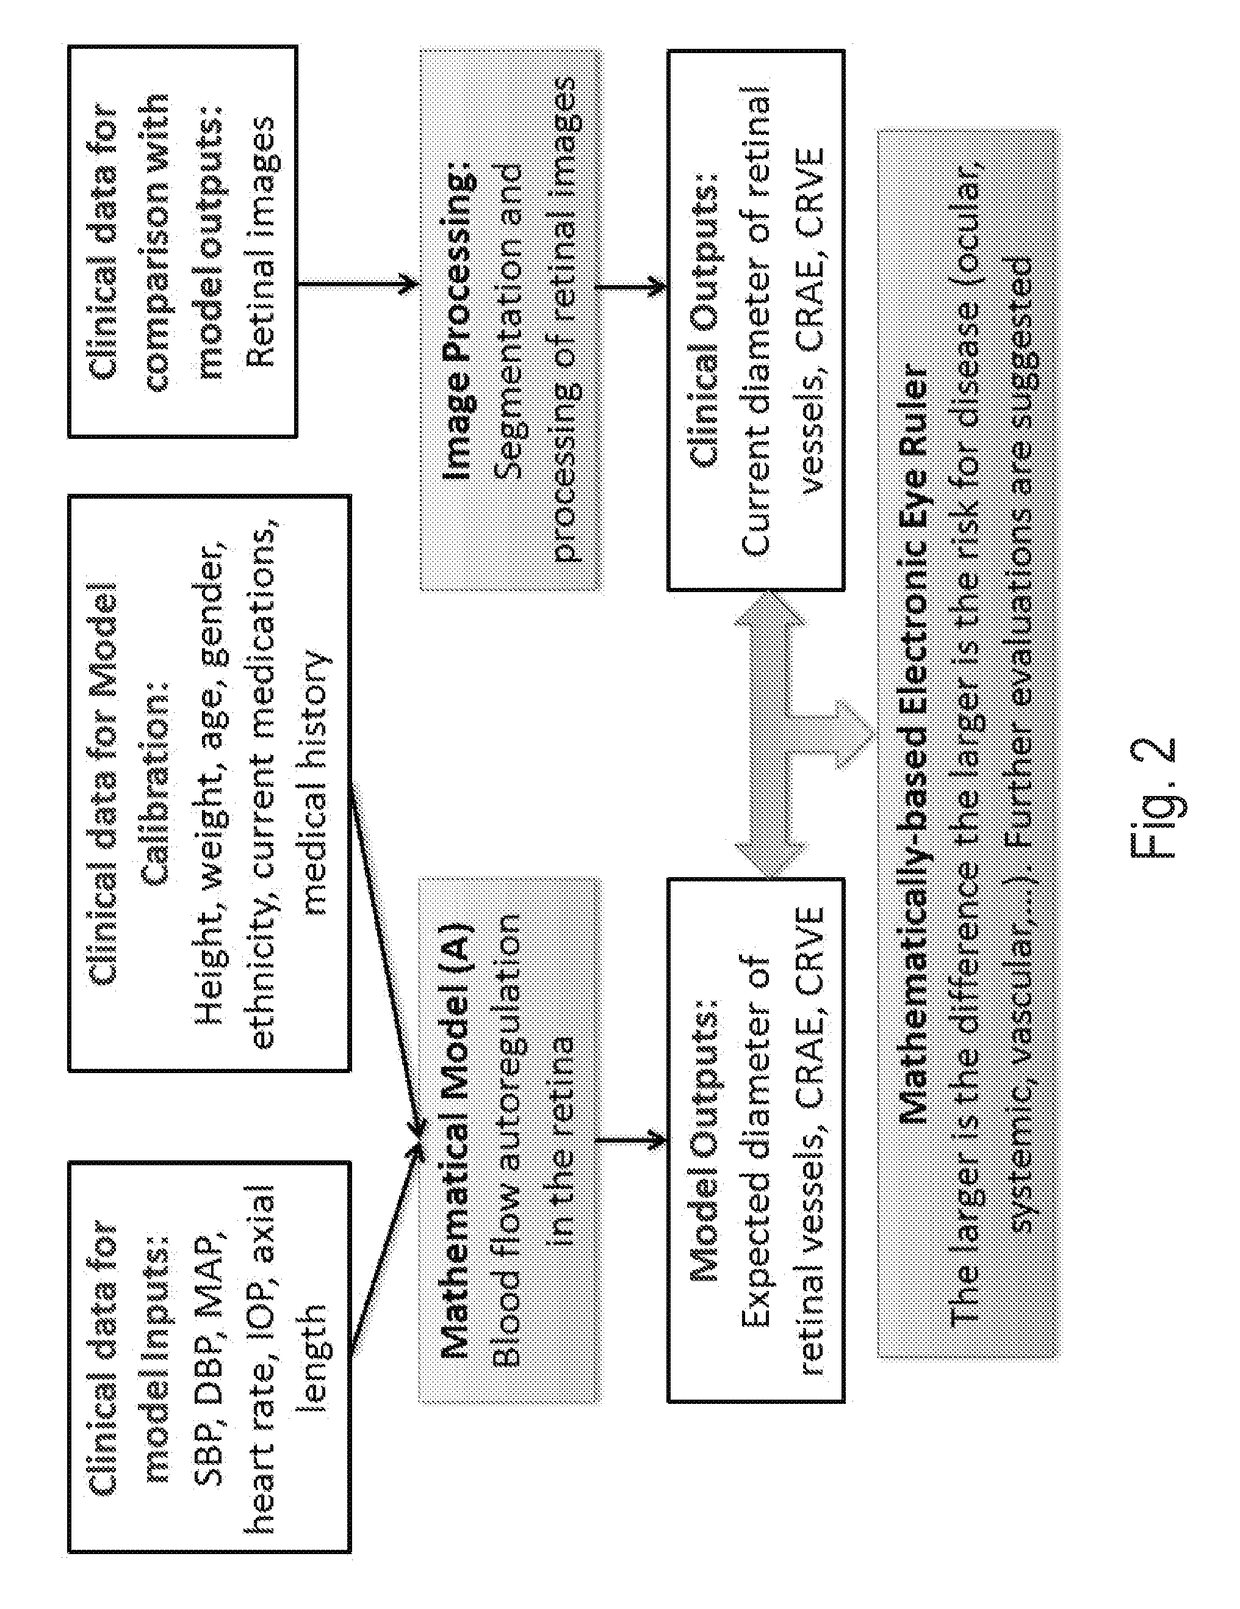 Methods and systems for patient specific identification and assessmentof ocular disease risk factors and treatment efficacy